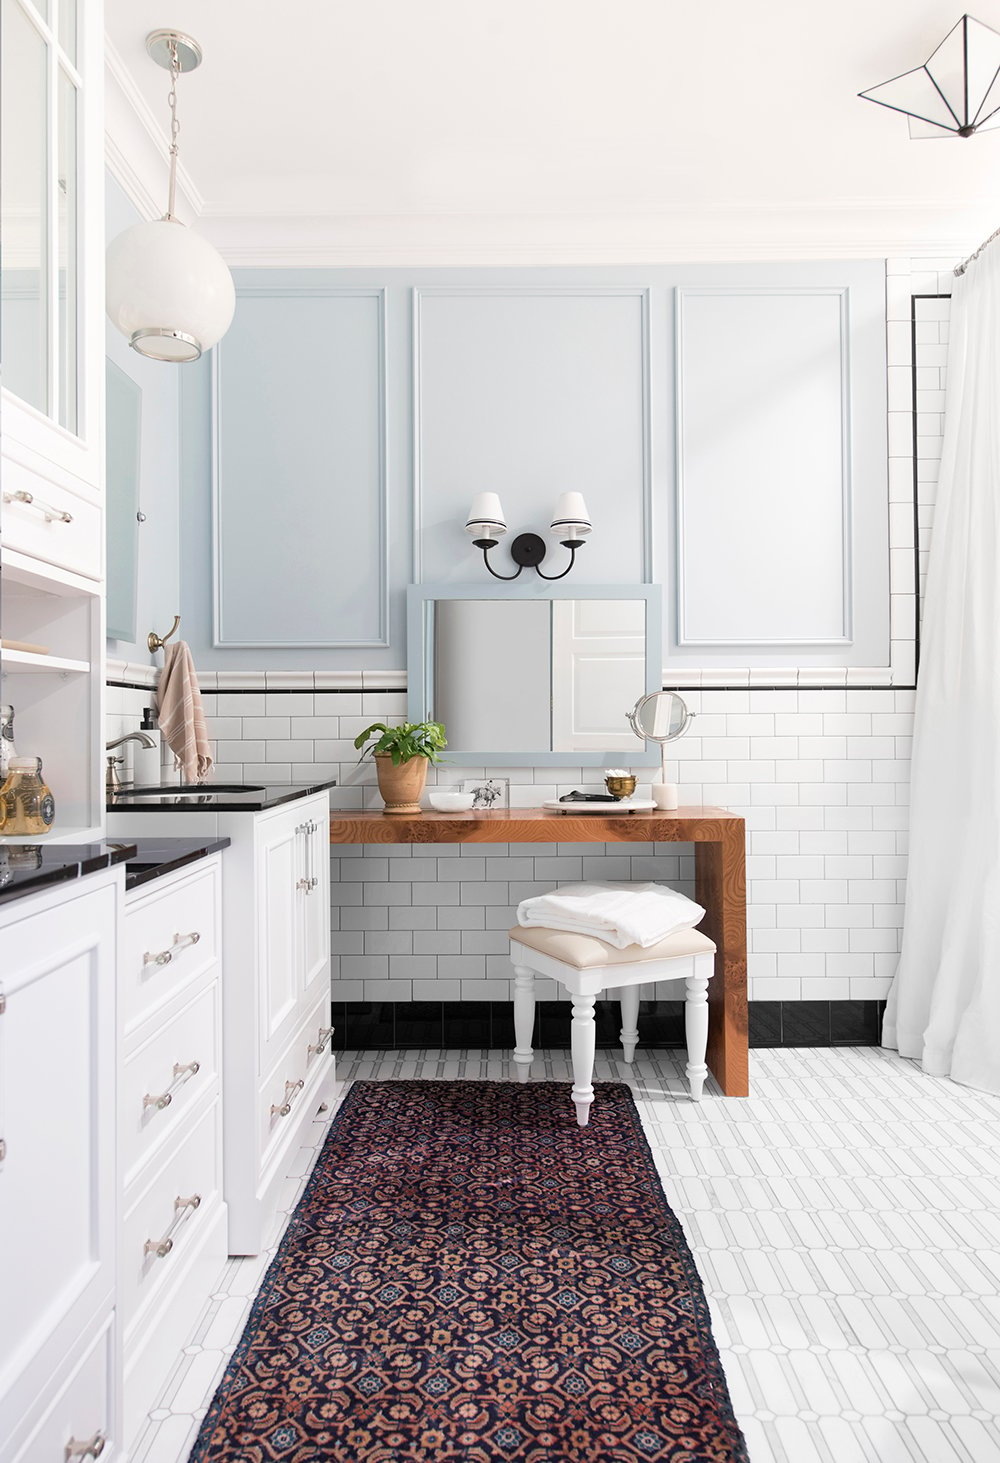 Design Discussion : Wool Rugs in the Bathroom - roomfortuesday.com